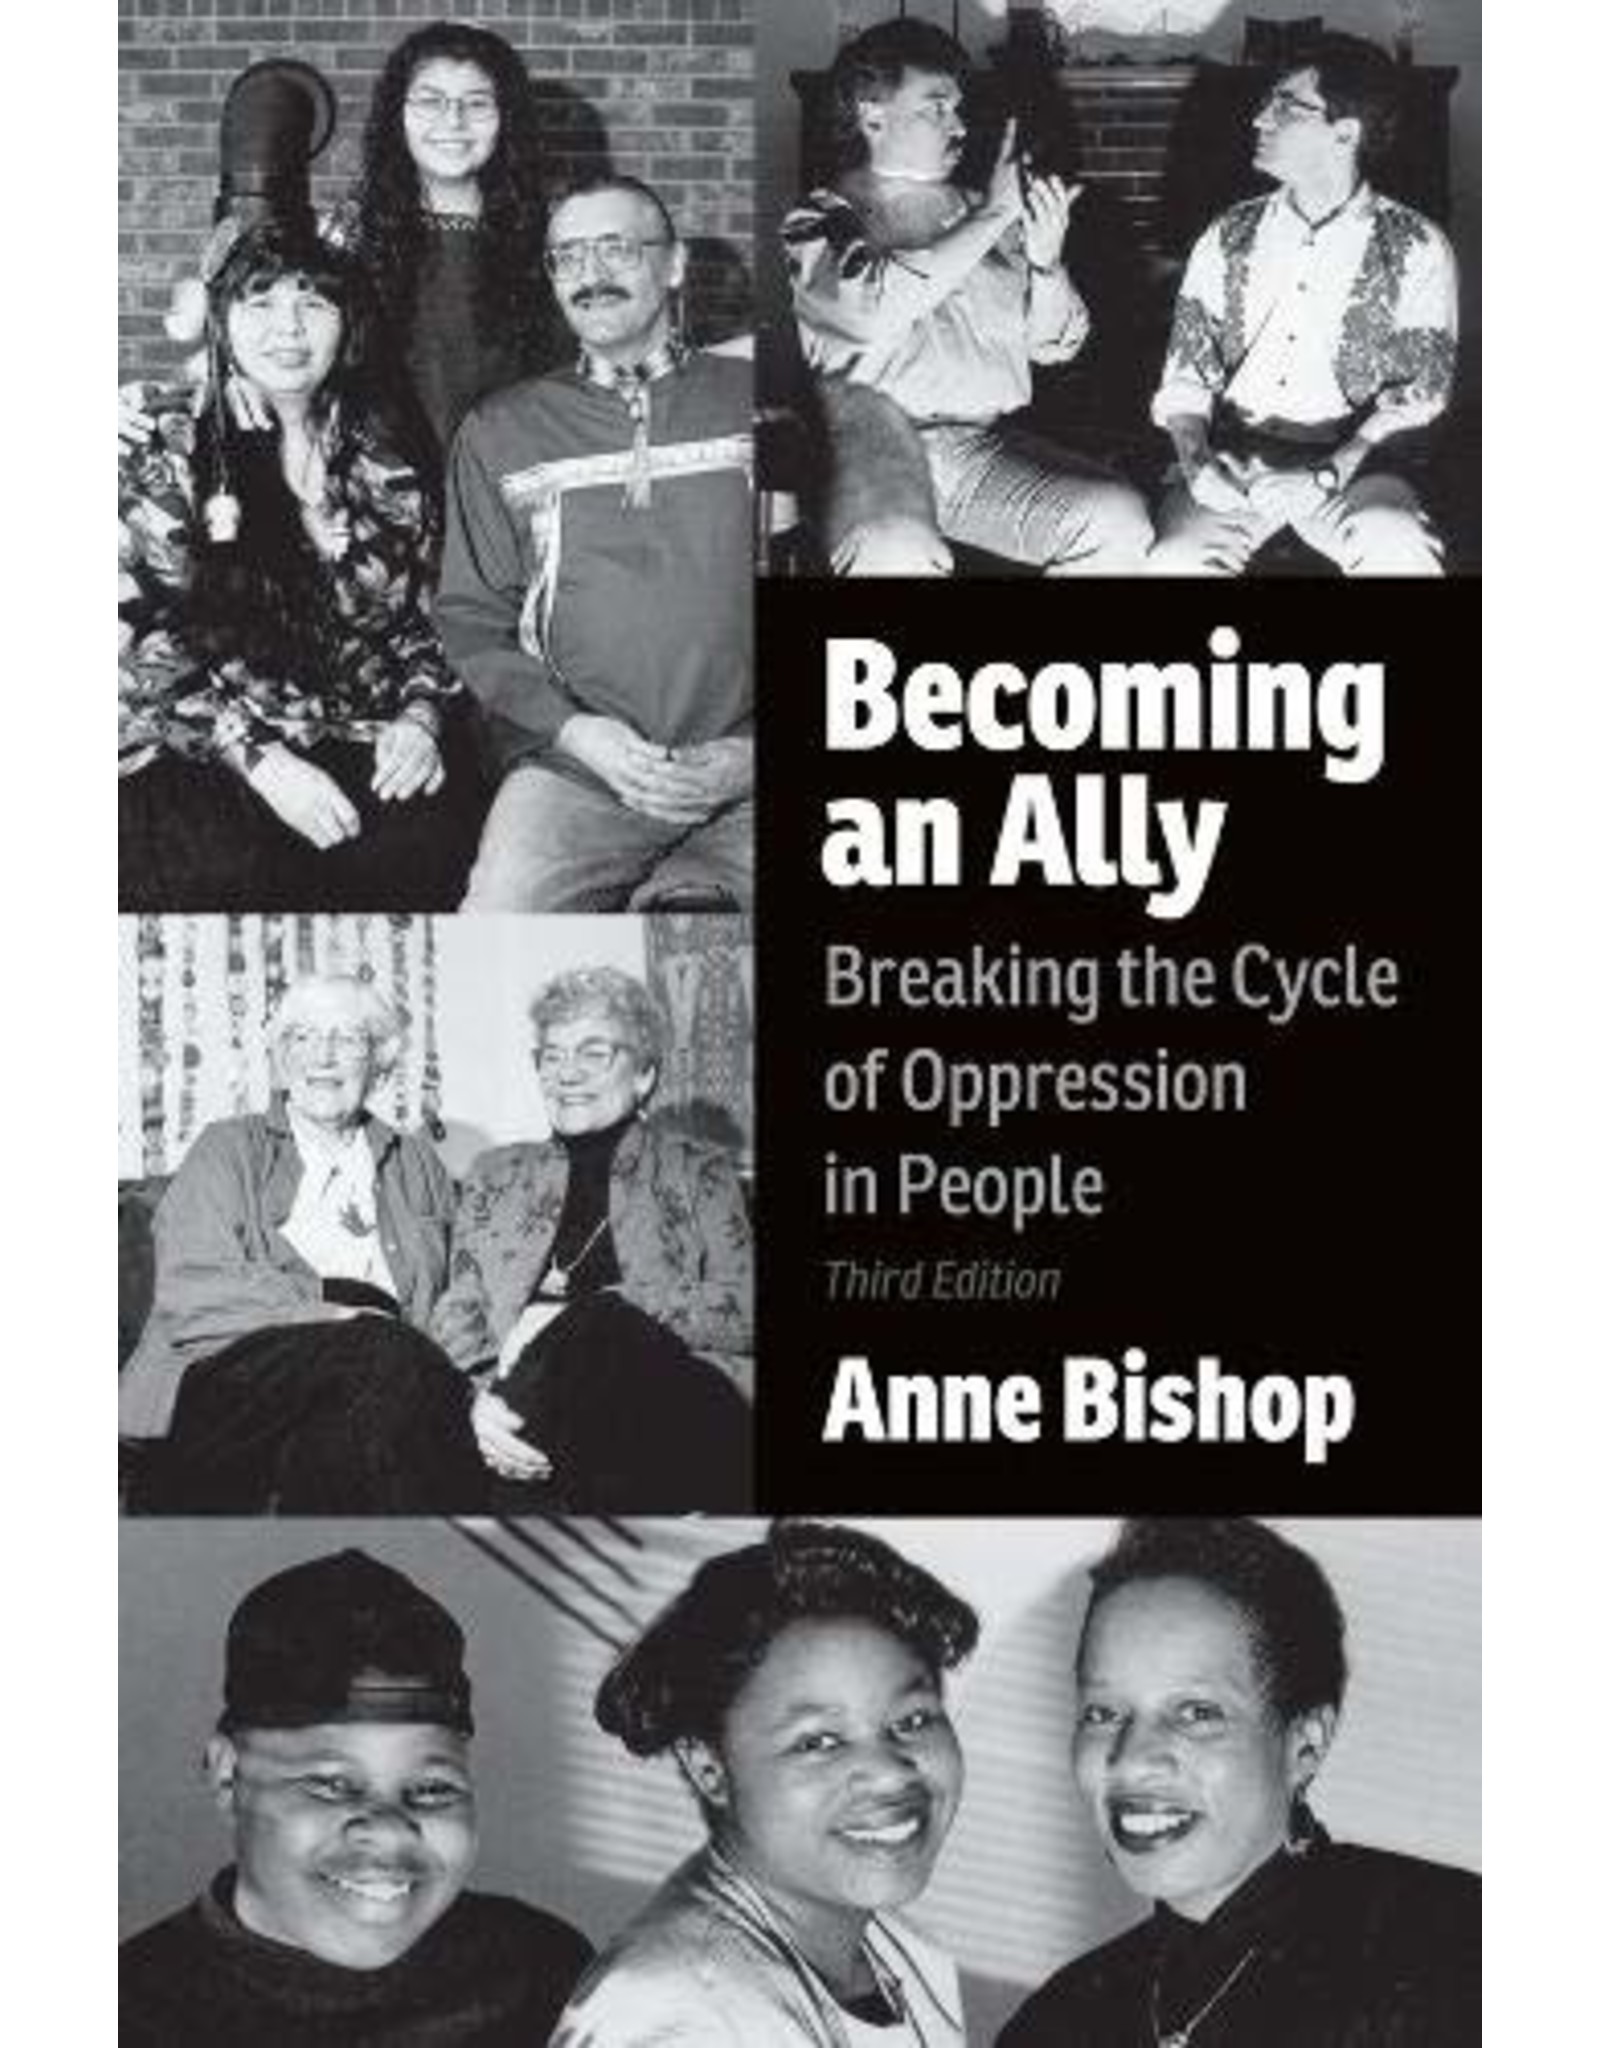 Textbook Becoming an Ally, 3rd Edition: Breaking the Cycle of Oppression in People